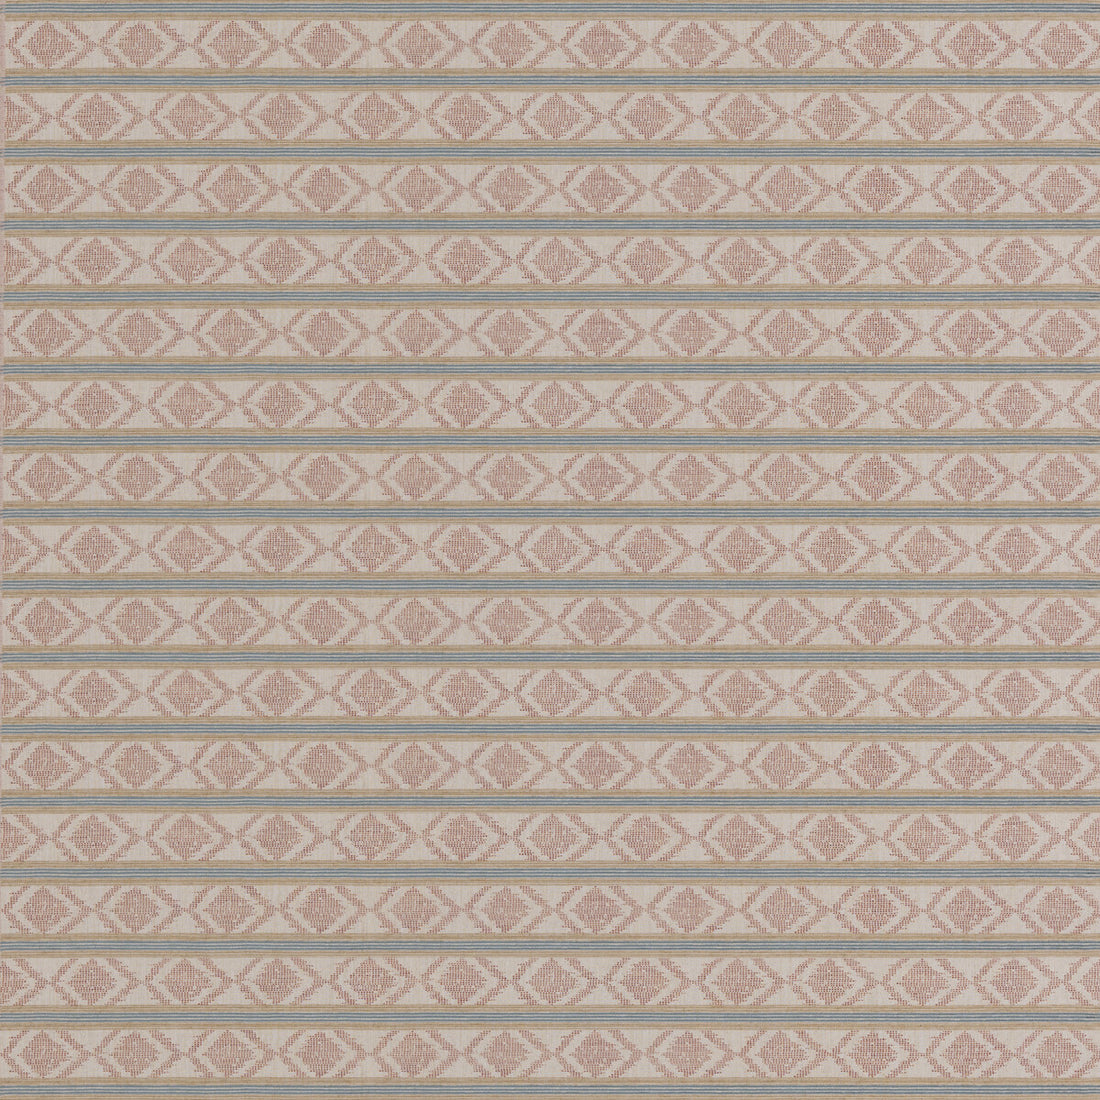 Burford Stripe fabric in coral/aqua color - pattern BF11034.3.0 - by G P &amp; J Baker in the Burford Weaves collection